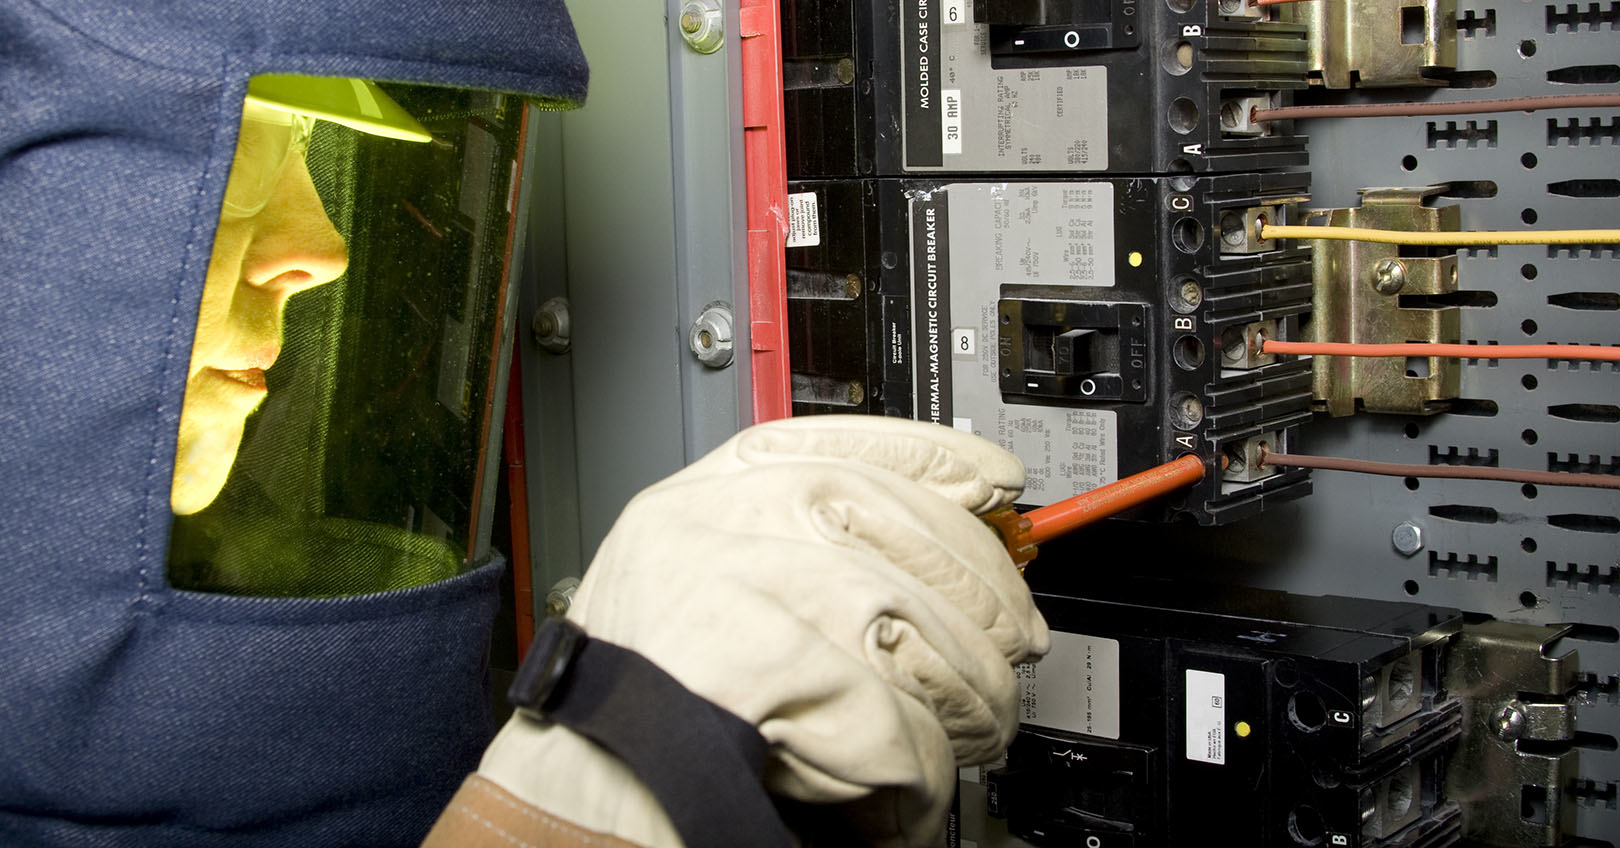 electrical hazards in the workplace